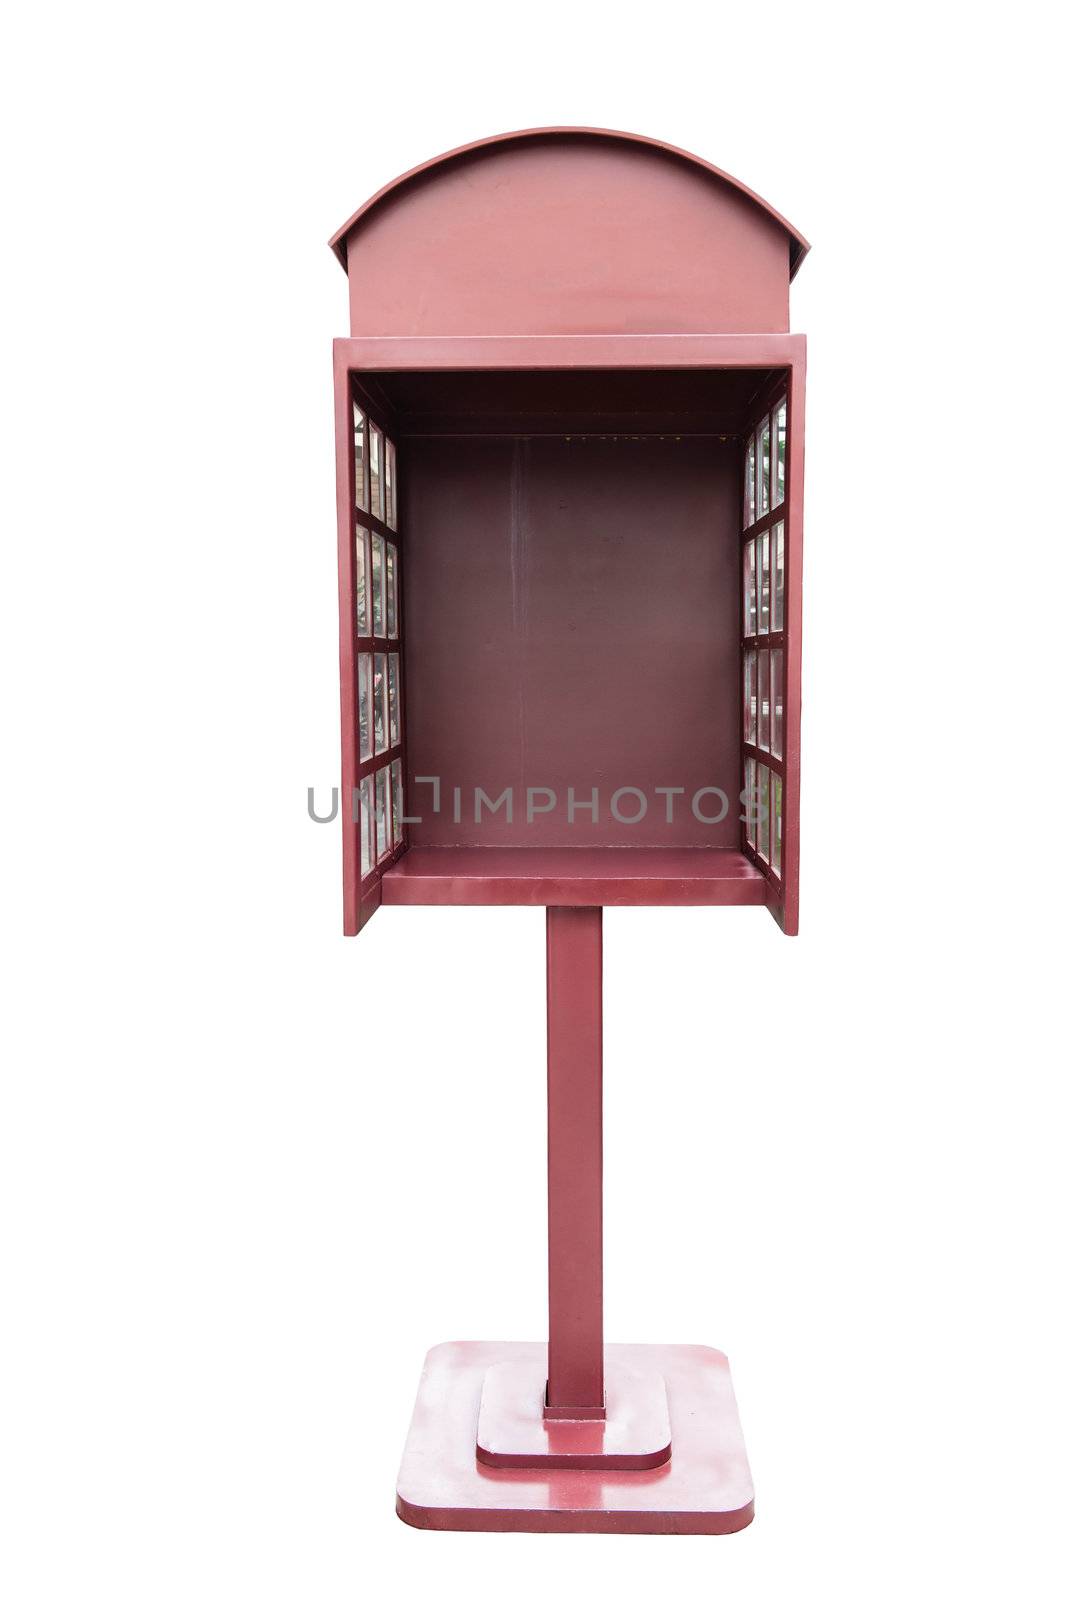 Wooden empty public telephone booth by sasilsolutions